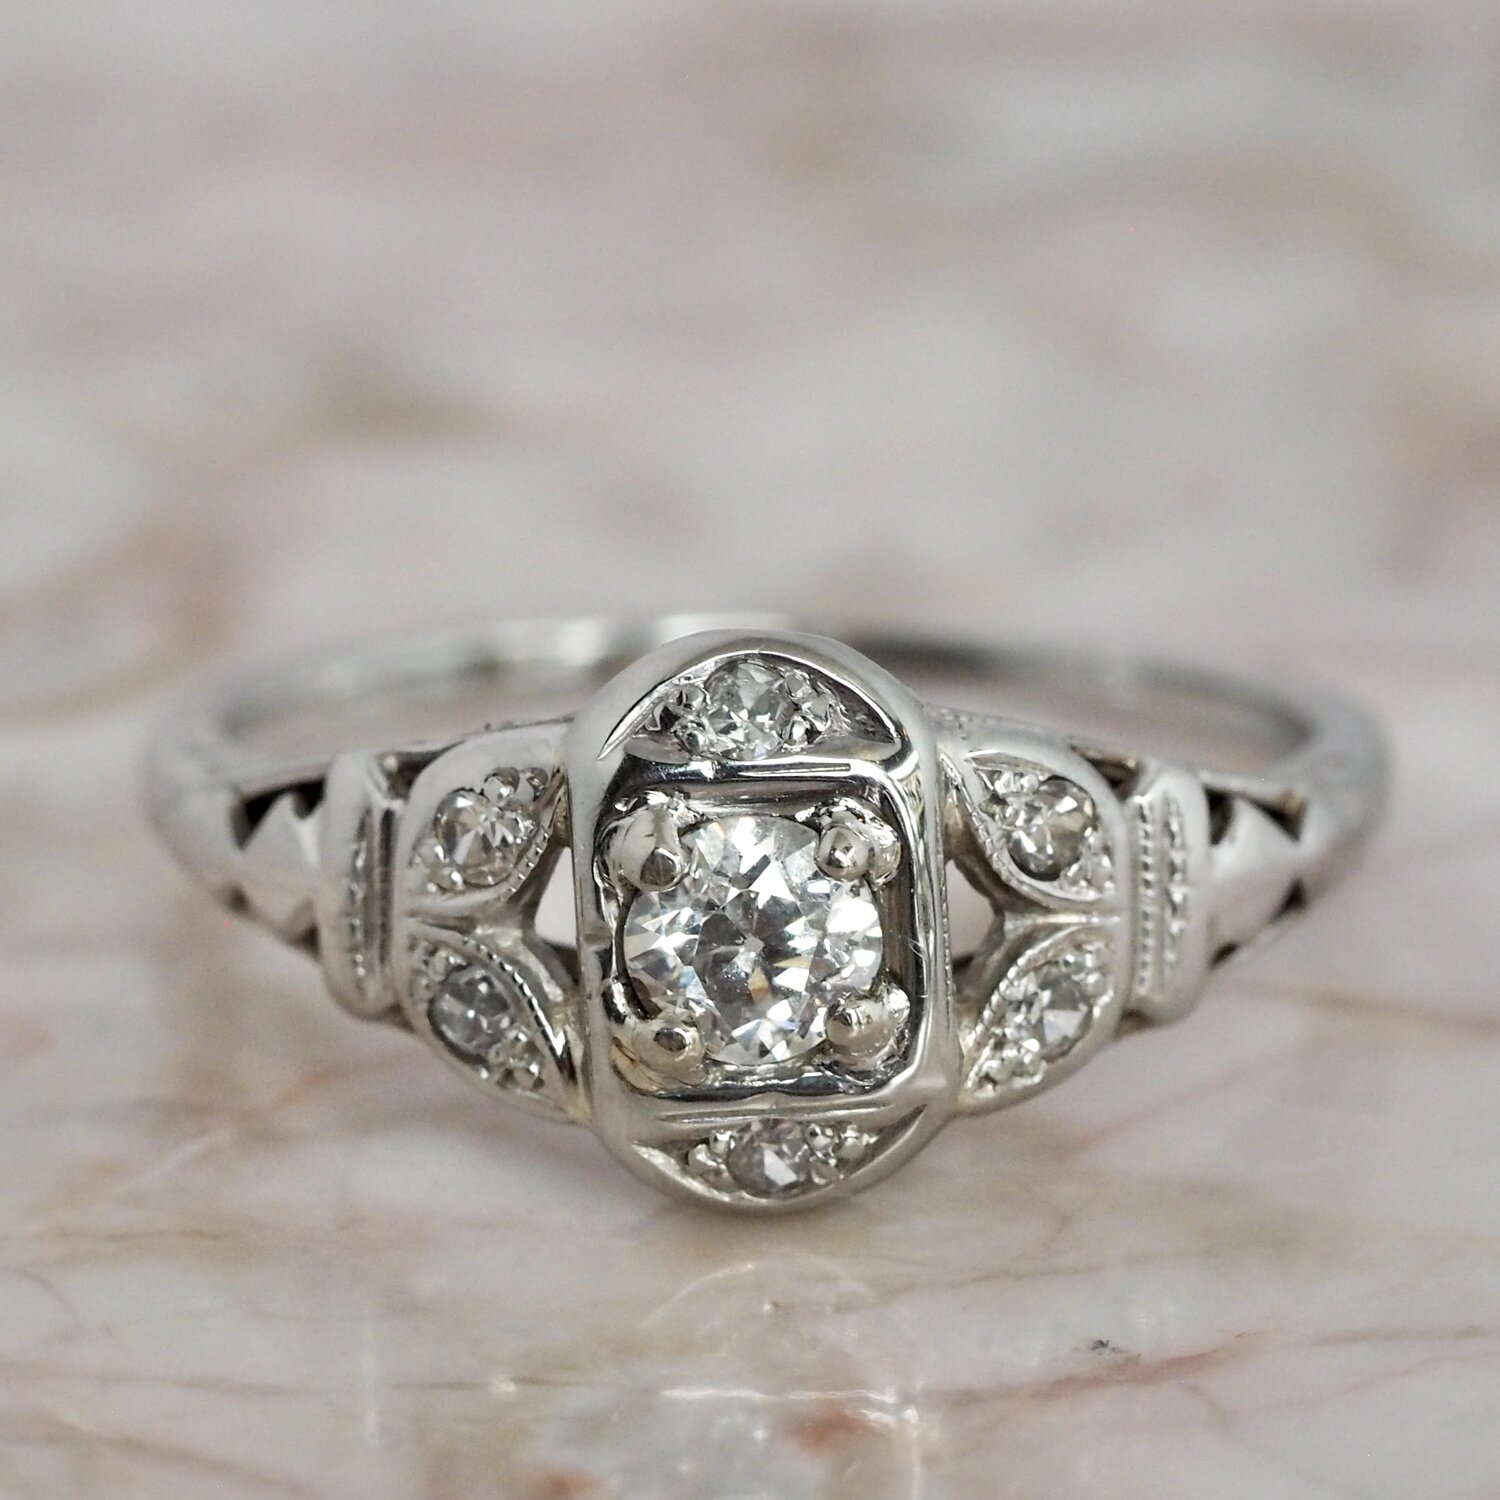 Tot ziens schijf bad Antique Art Deco 18k White Gold Old European Cut Diamond Ring — OKO|  Curated Vintage and Antique Jewelry and Engagement Rings